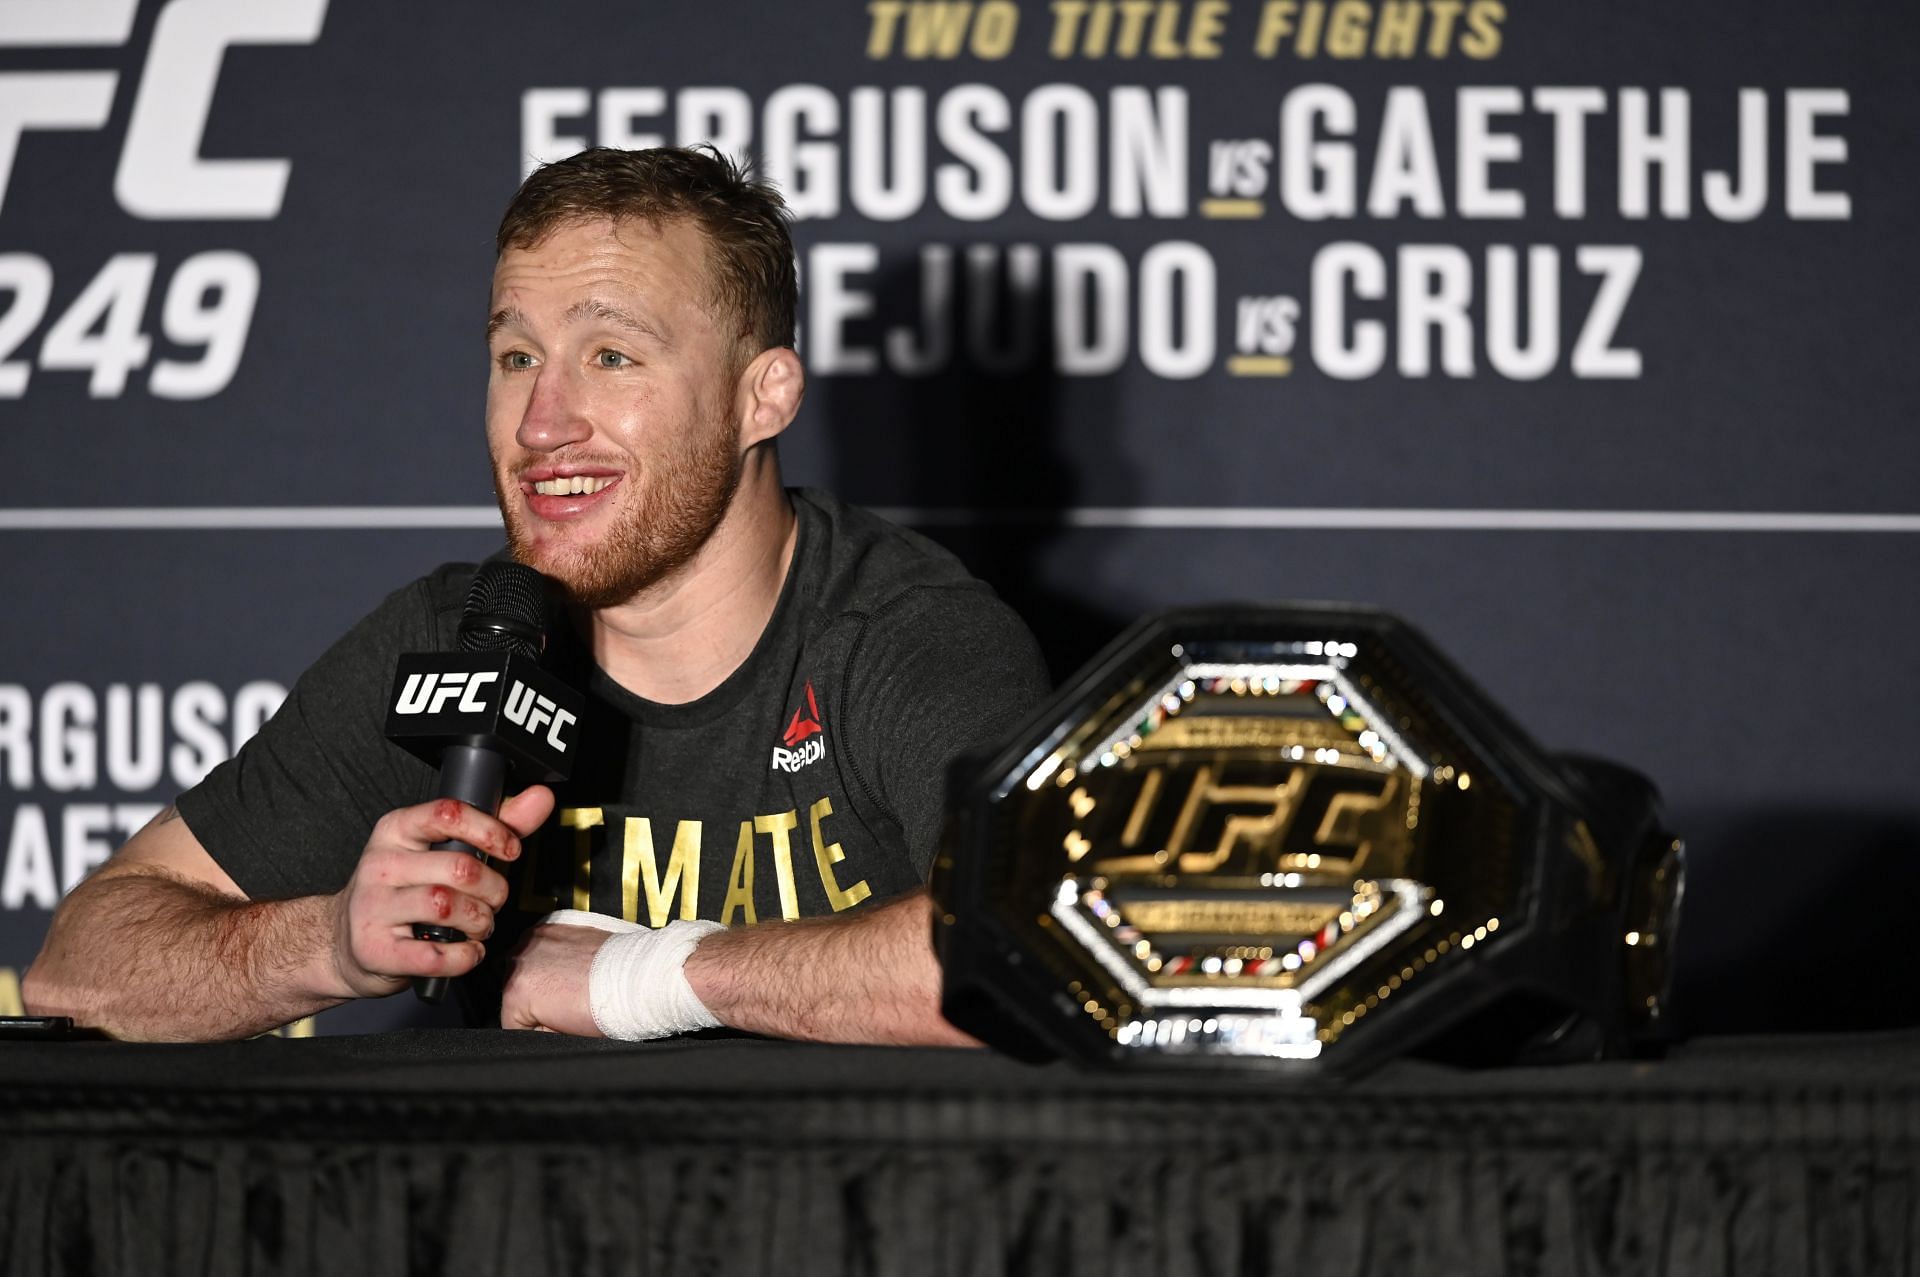 Justin Gaethje after his win against Tony Ferguson at UFC 249 [Image courtesy of Getty]